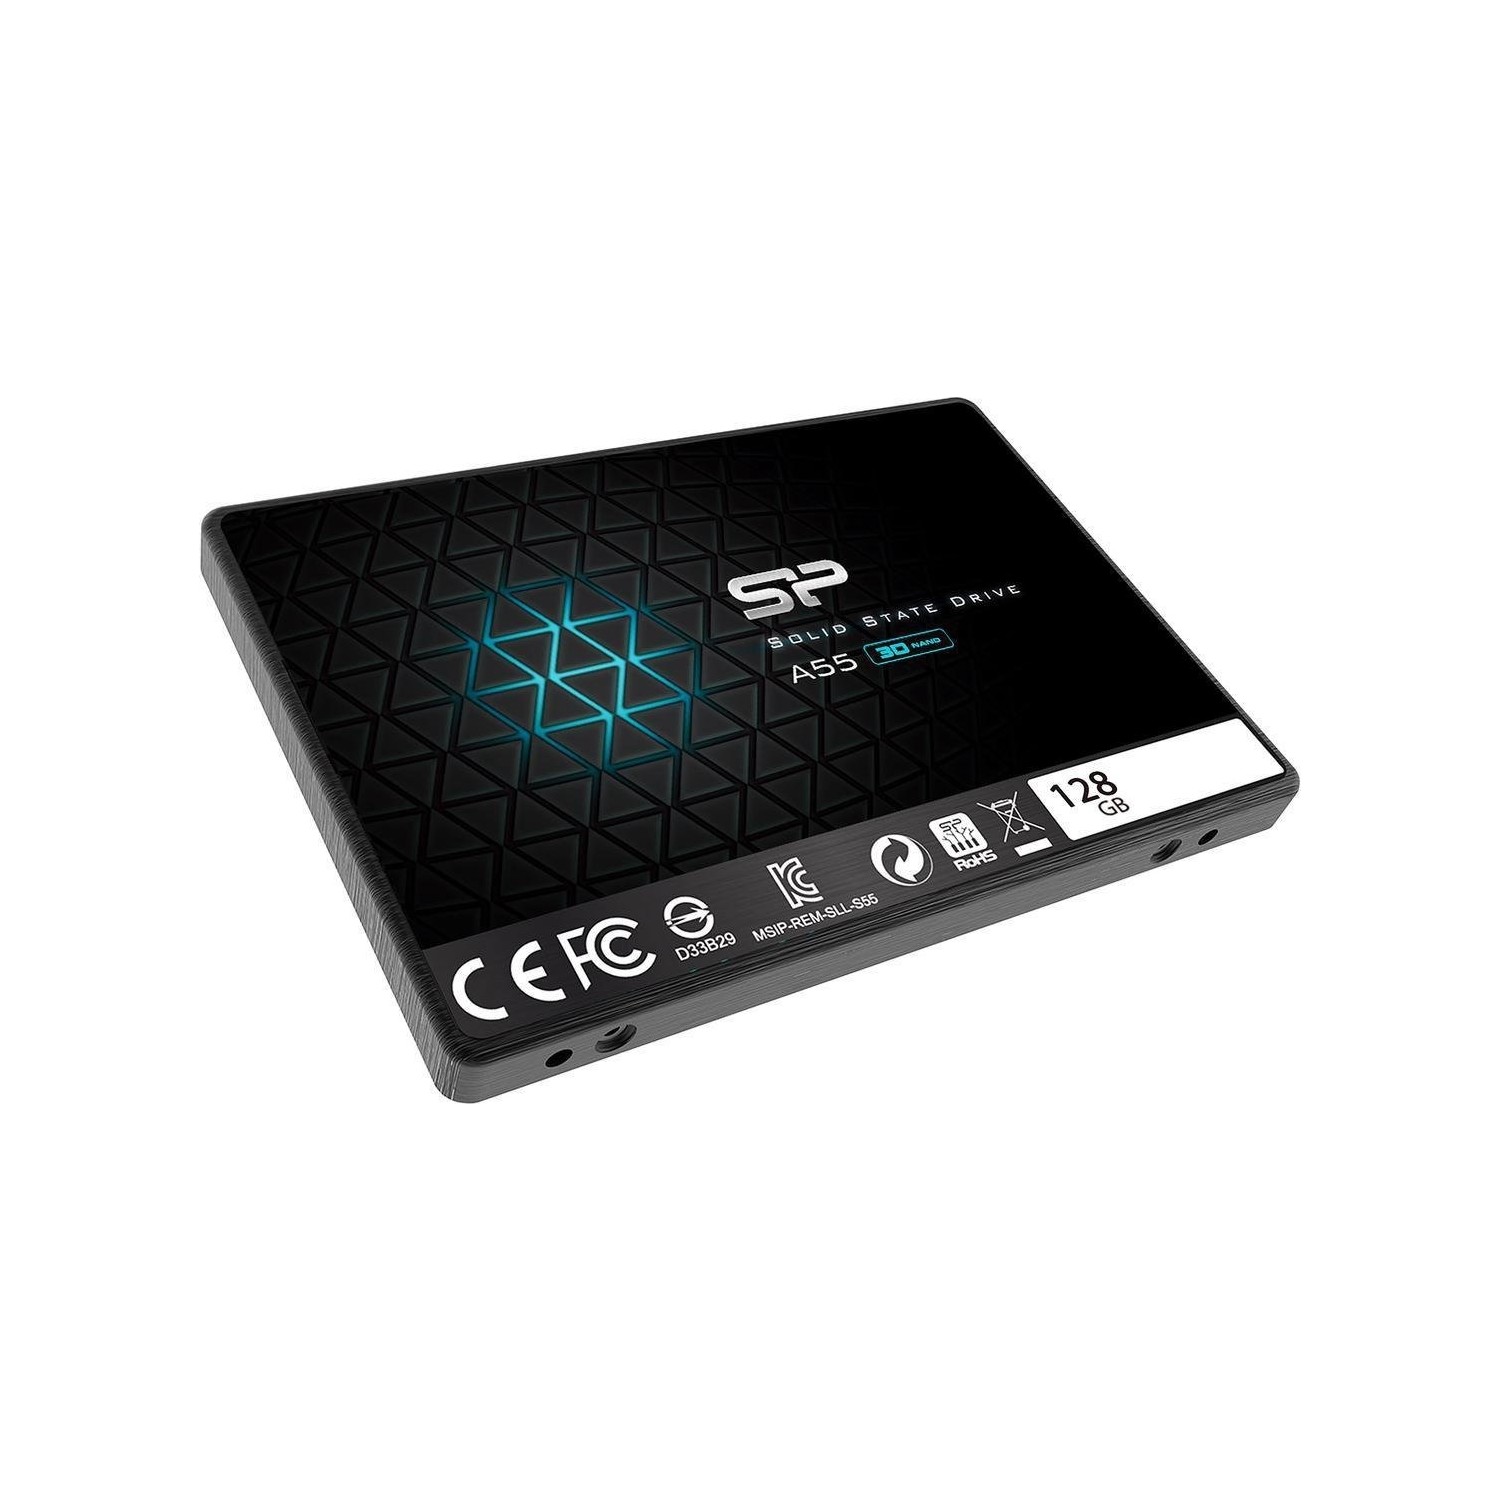 Siliconpwr 128GB SATA 3.0 550-420MB/s 2.5" SSD Disk SP128GBSS3A55S25